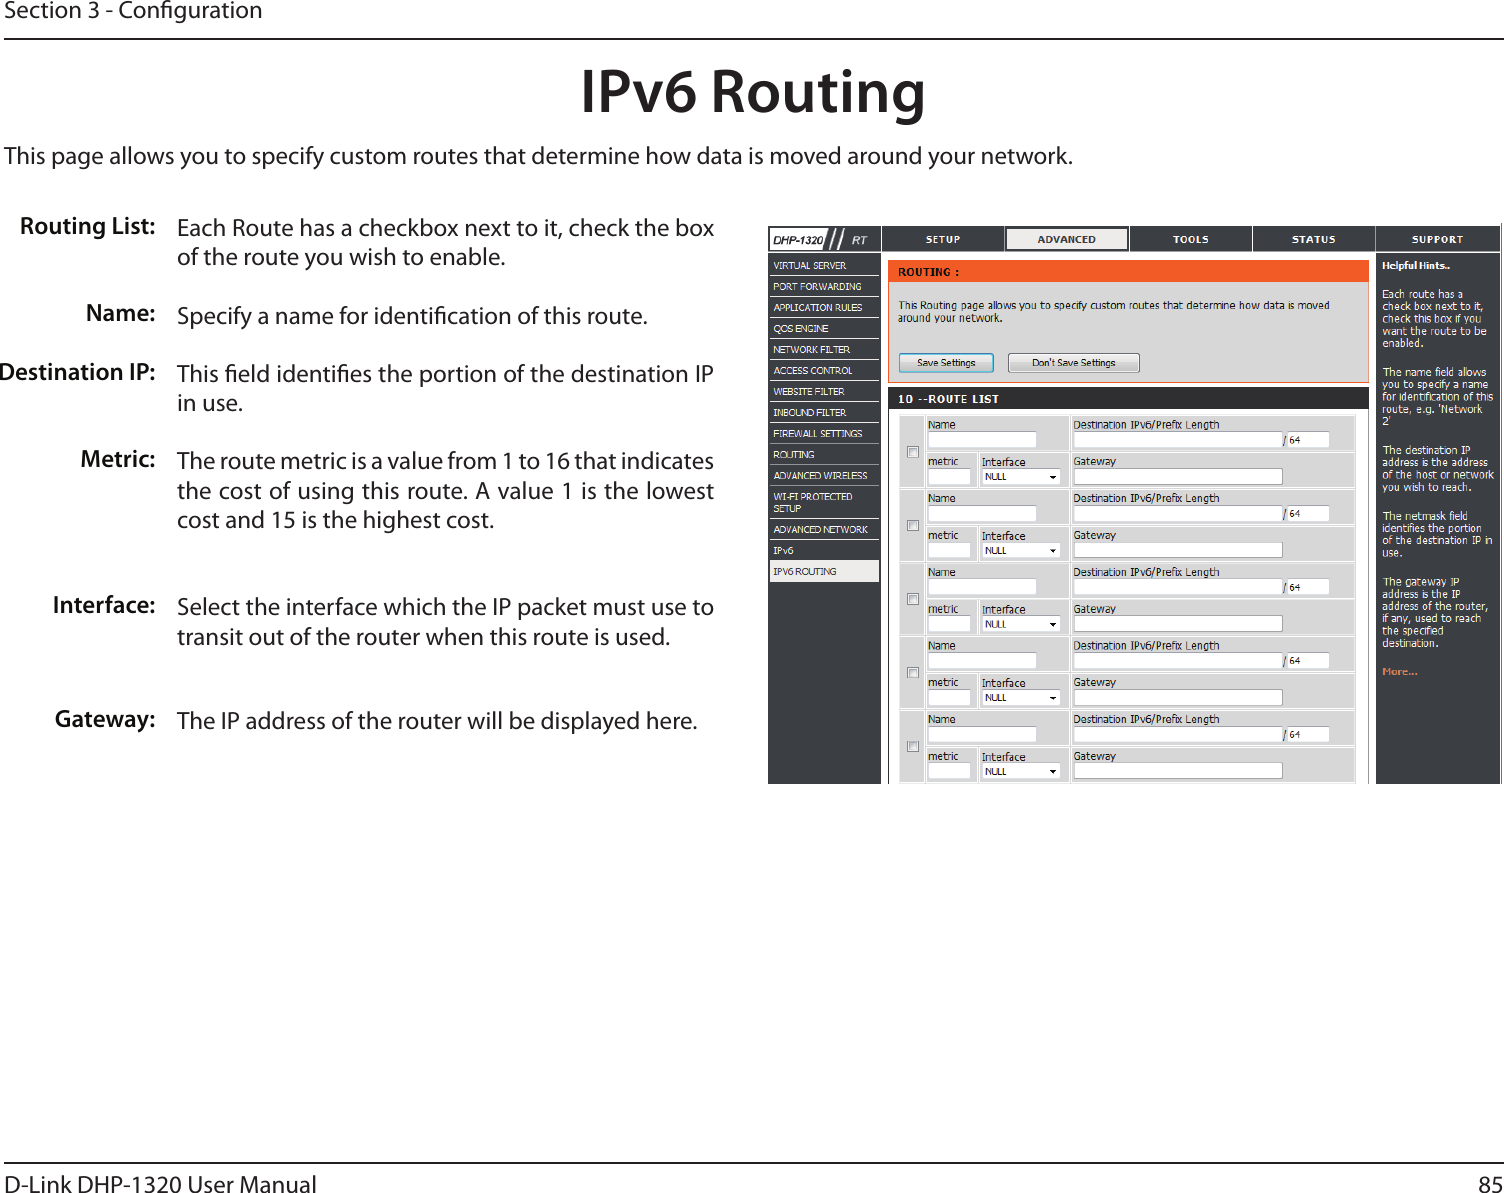 85D-Link DHP-1320 User ManualSection 3 - CongurationIPv6 Routing This page allows you to specify custom routes that determine how data is moved around your network. Routing List:Name:Destination IP:Metric:Interface:Gateway:Each Route has a checkbox next to it, check the box of the route you wish to enable. Specify a name for identication of this route.This eld identies the portion of the destination IP in use. The route metric is a value from 1 to 16 that indicates the cost of using this route. A value 1 is the lowest cost and 15 is the highest cost.Select the interface which the IP packet must use to transit out of the router when this route is used.The IP address of the router will be displayed here. 